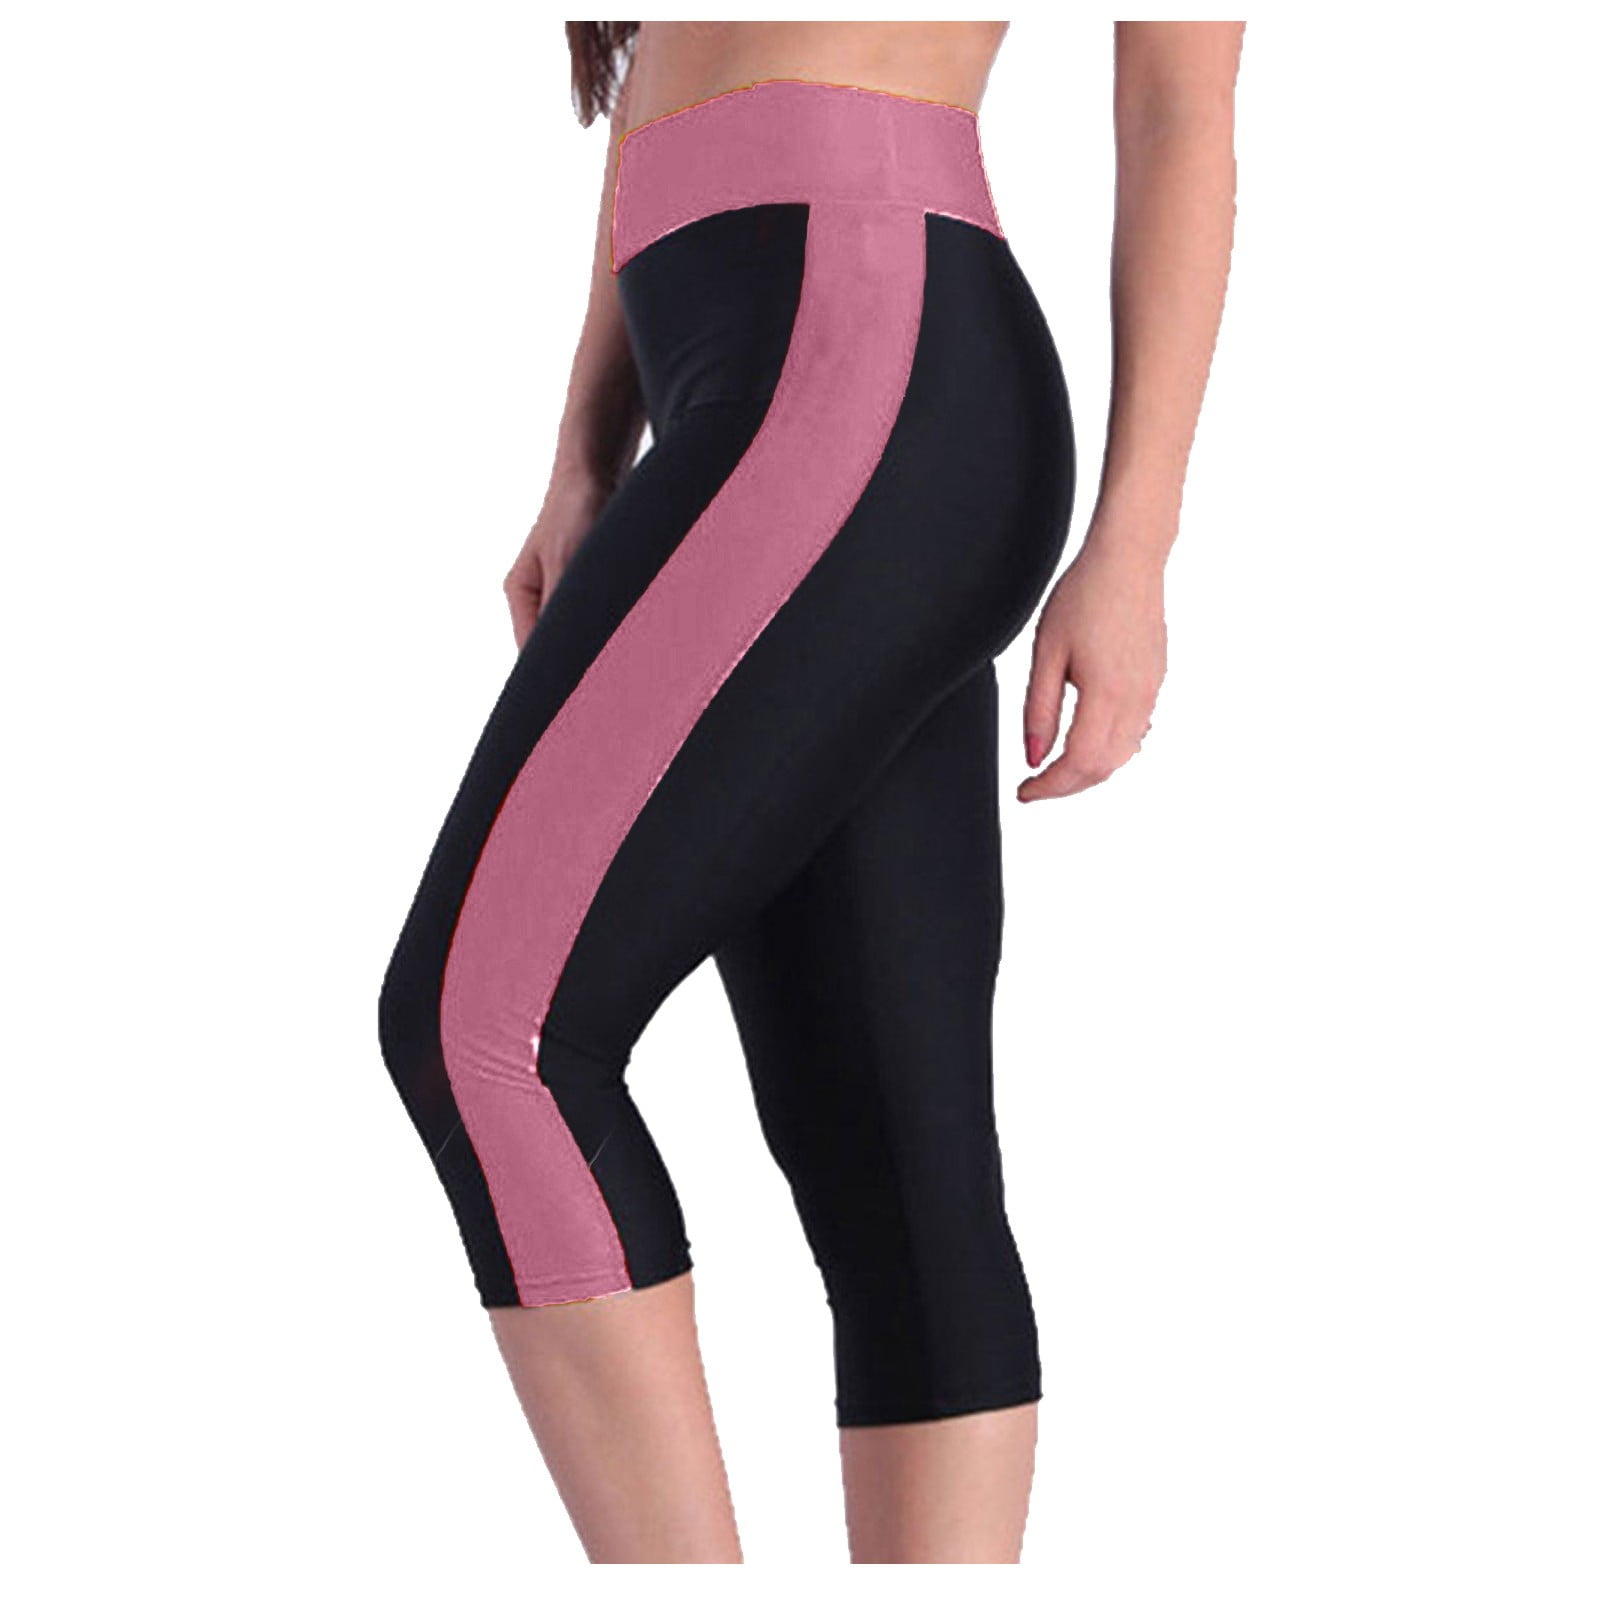 leggings with pockets for women pink : Fengbay Capri Leggings for  Women,Yoga Capris with Pock